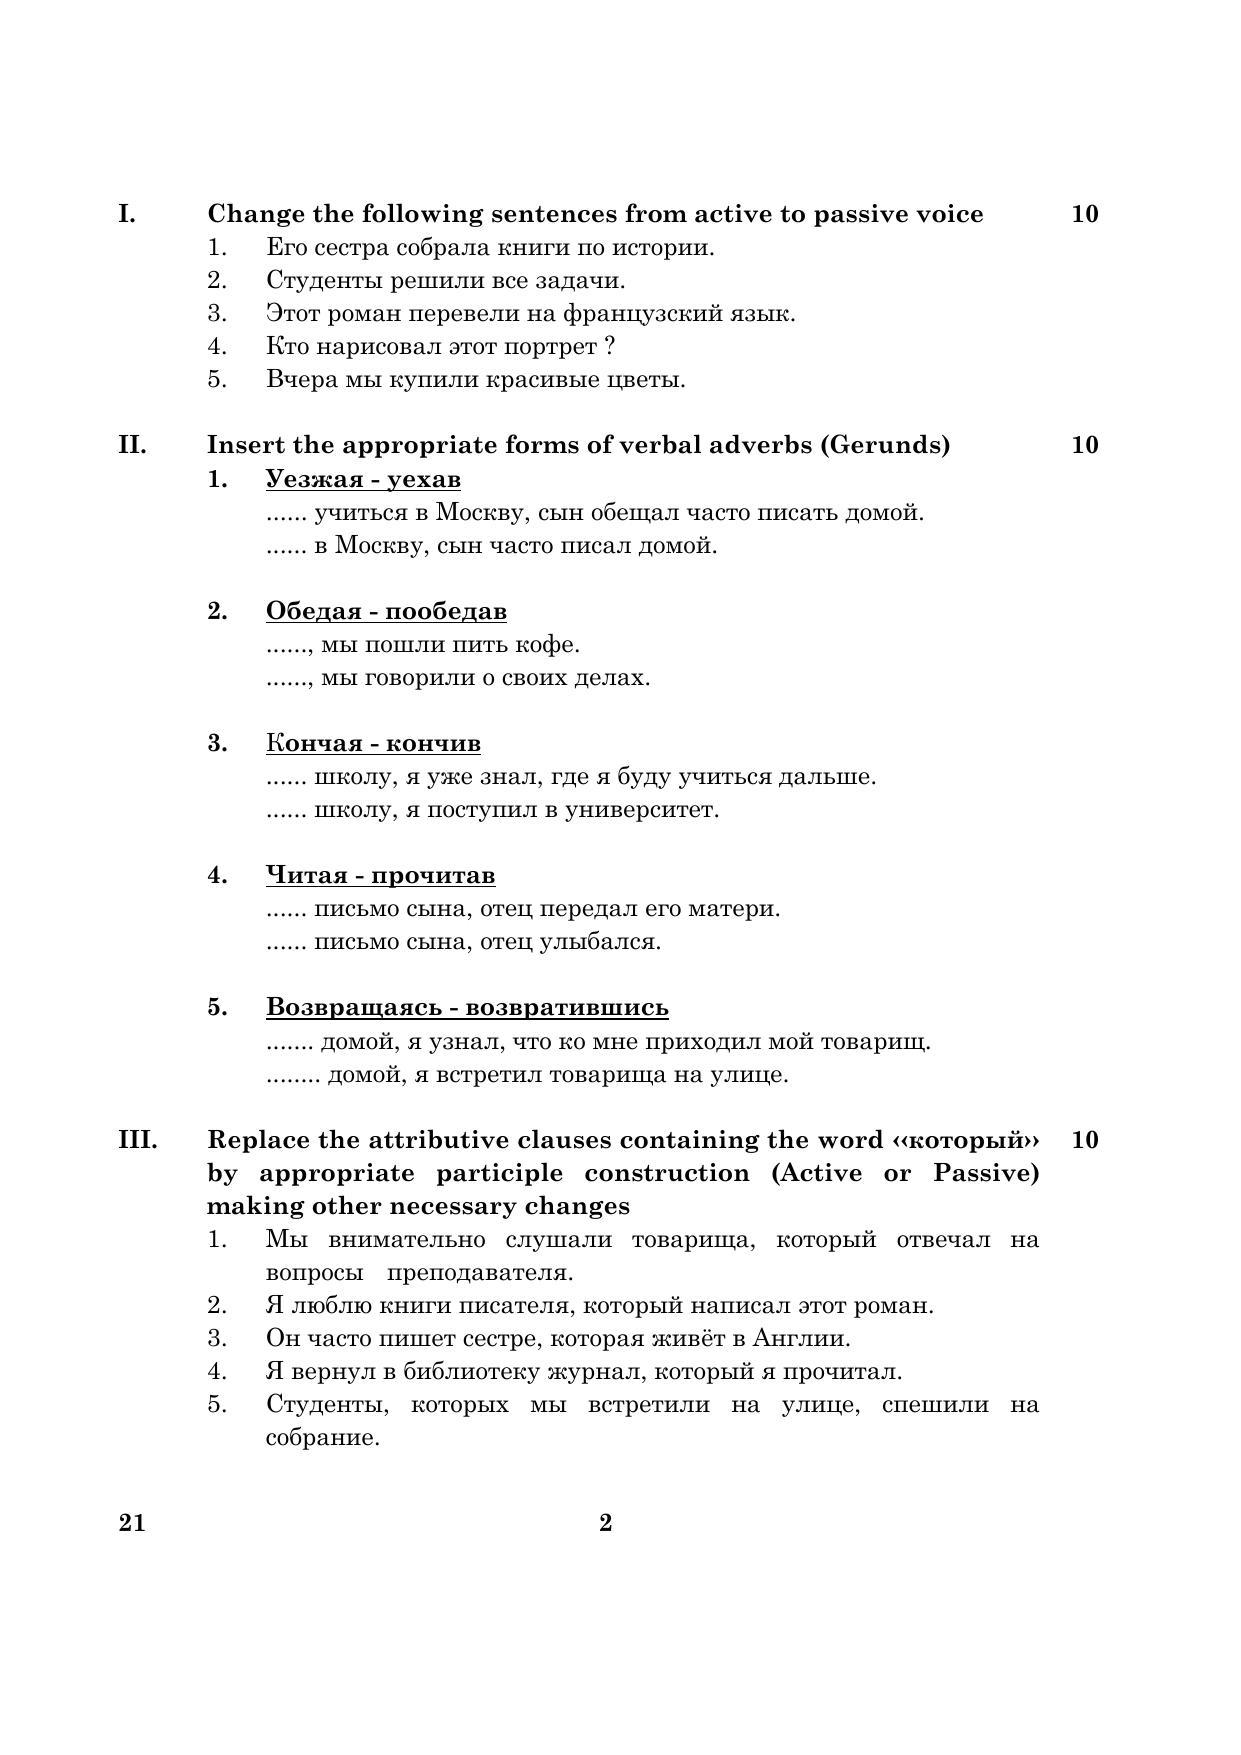 CBSE Class 12 021 Russian 2016 Question Paper - Page 2